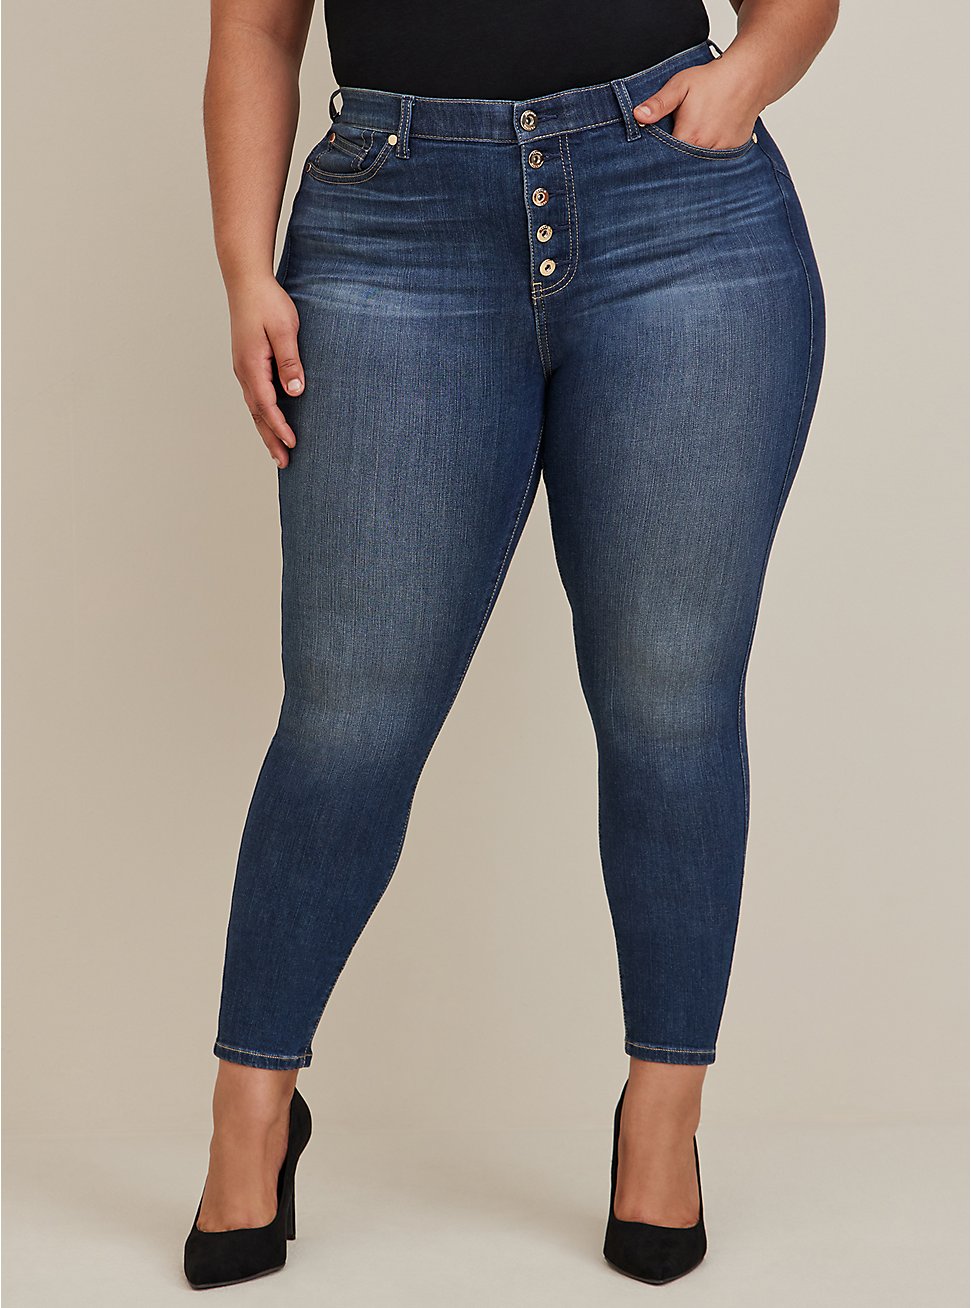 Plus Size Bombshell Skinny Premium Stretch High-Rise Jean, HOLLYWOOD BUTTON FLY, hi-res